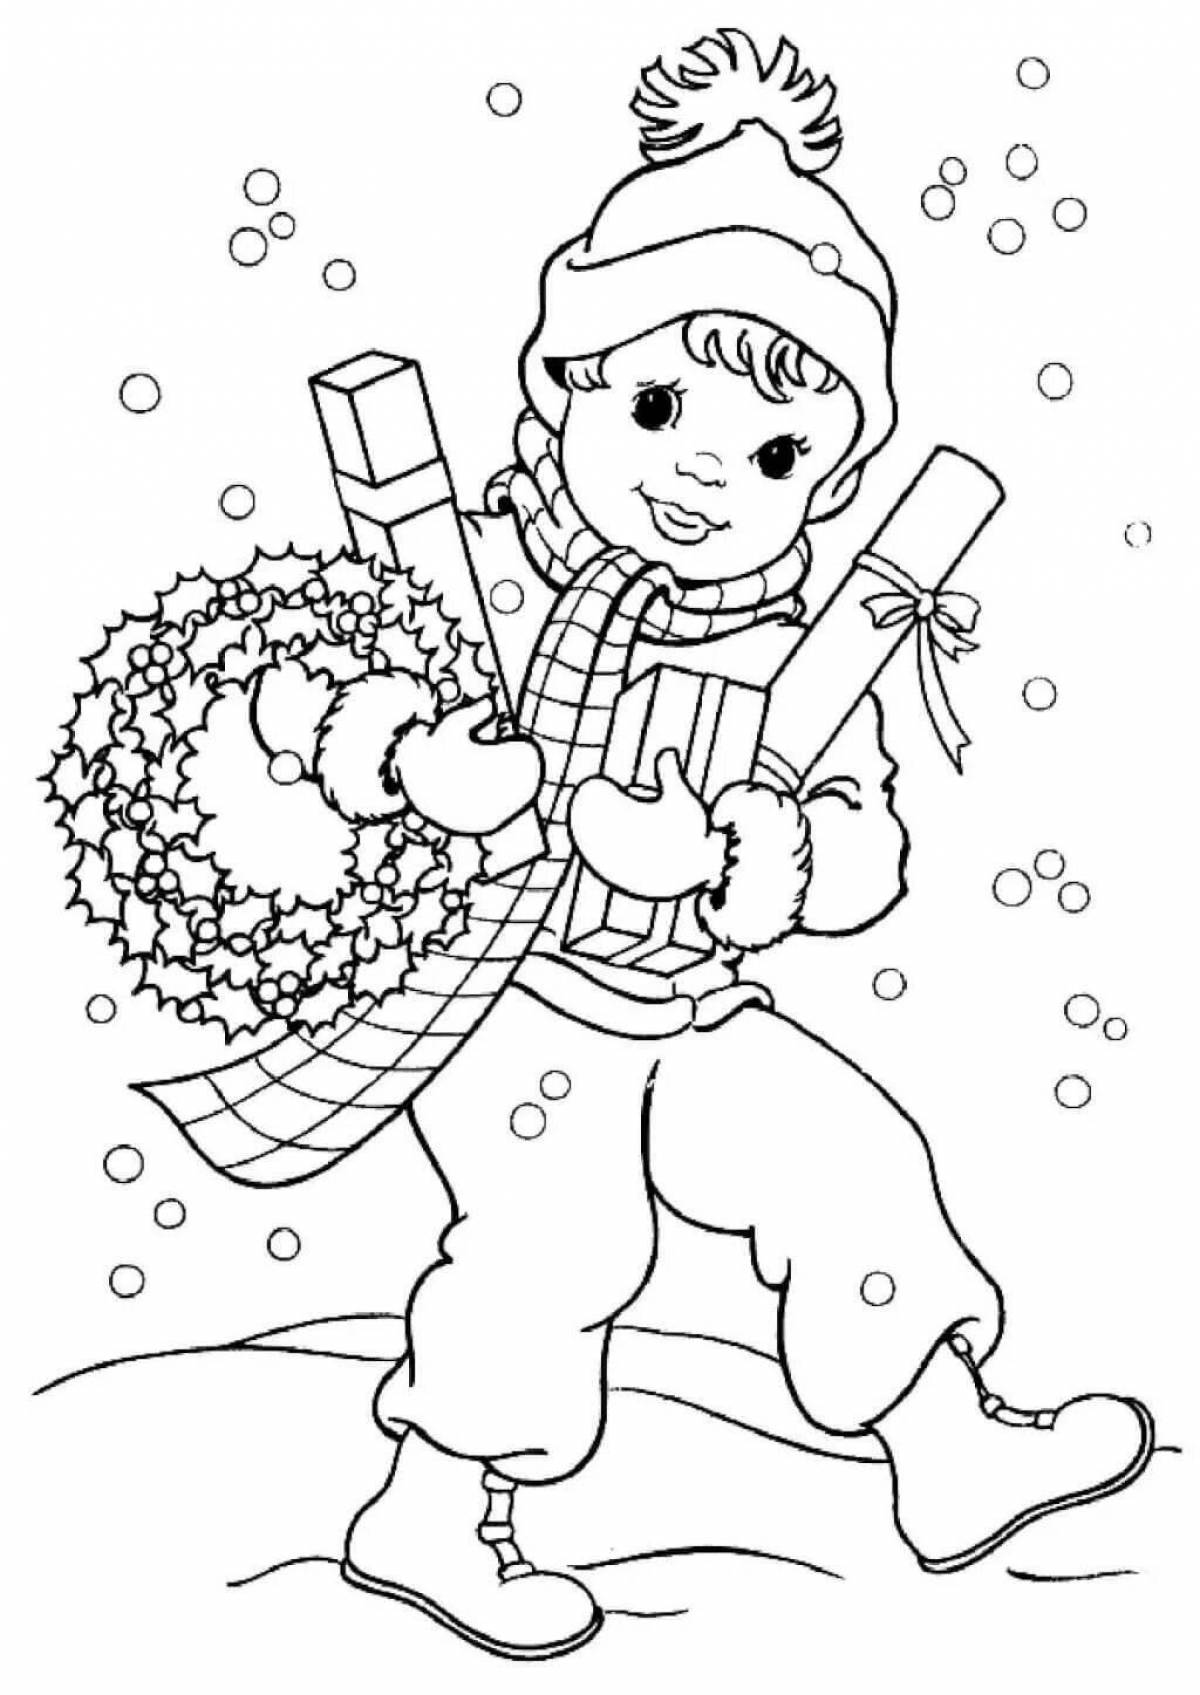 Cheerful winter coloring for boys